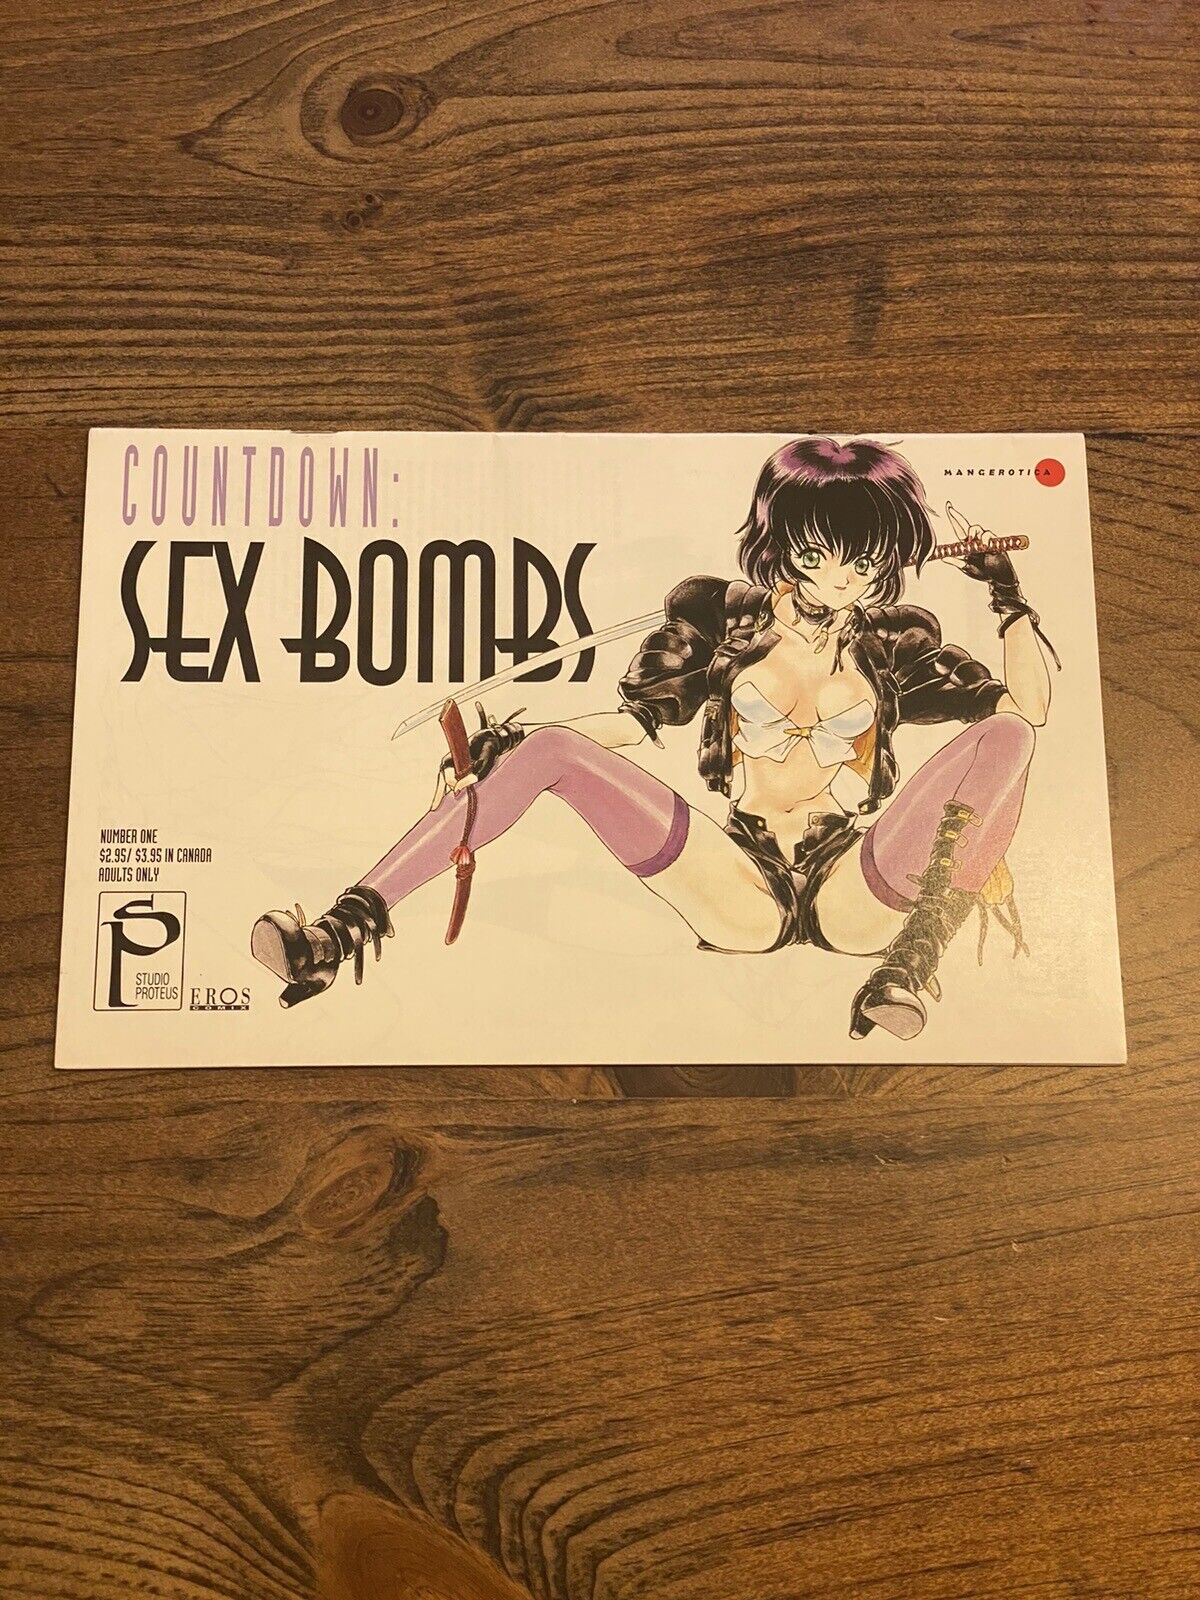 Countdown: Sex Bombs #1 Comic NM MORE Combined Shipping MORE